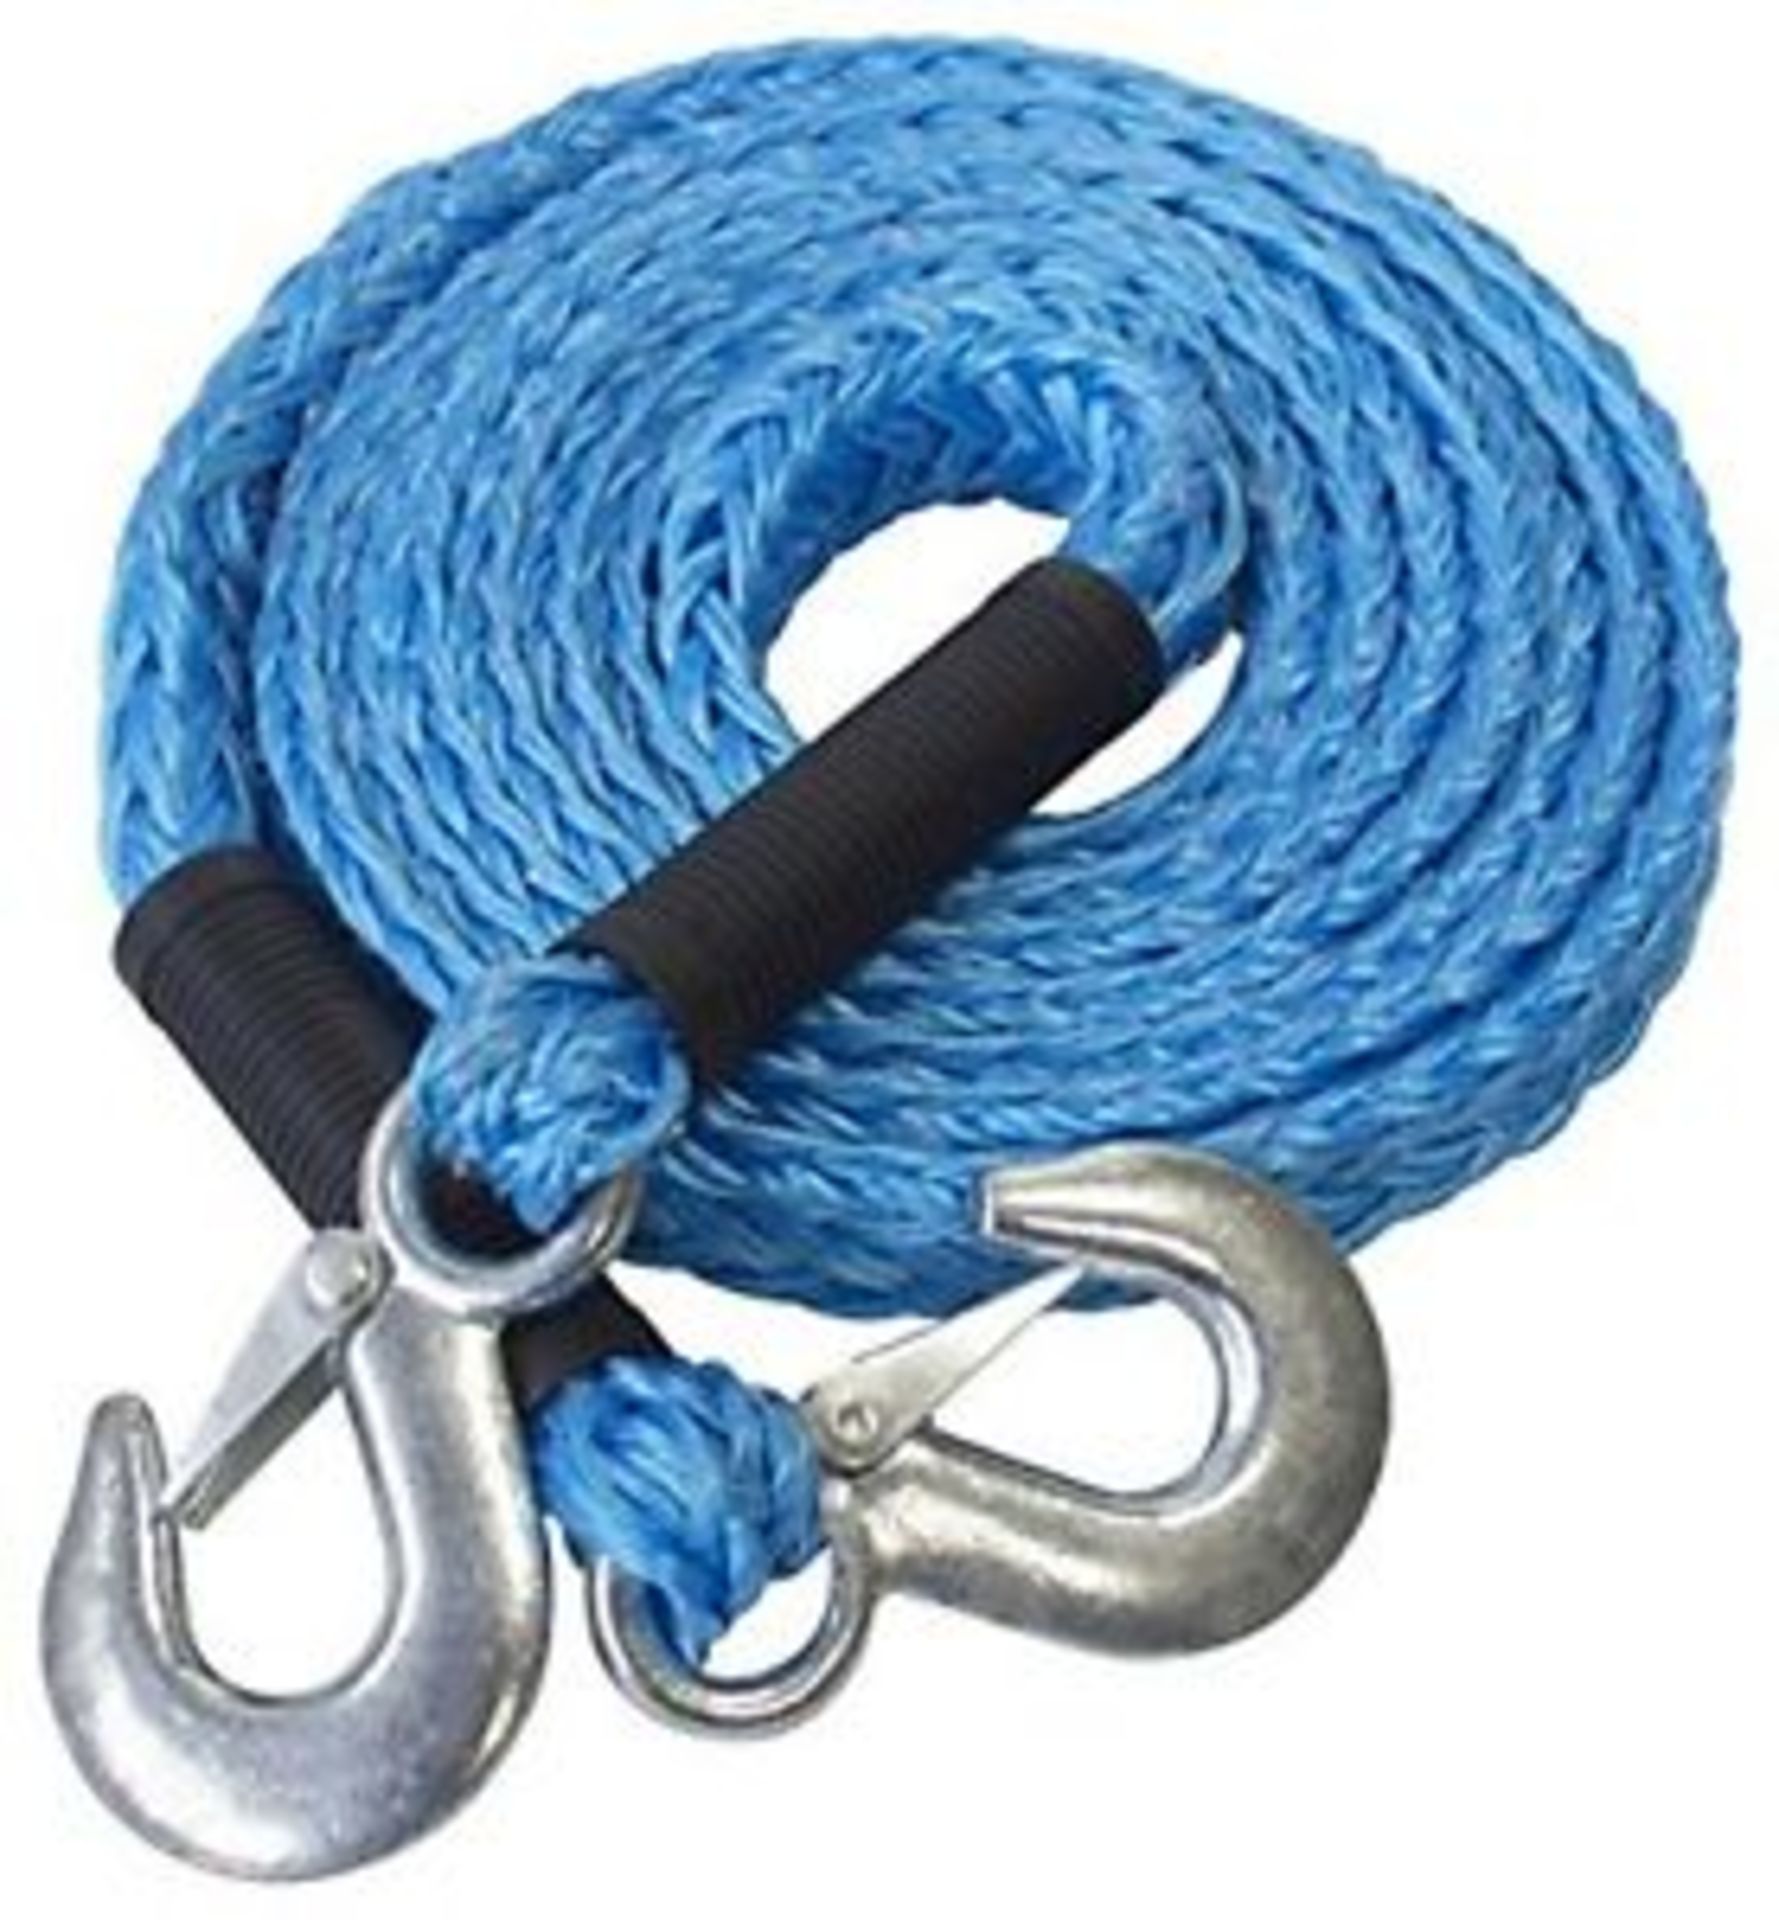 + VAT Brand New Four Metre Tow Rope With Shackle Hooks - Extremely Strong Polypropylene Rope